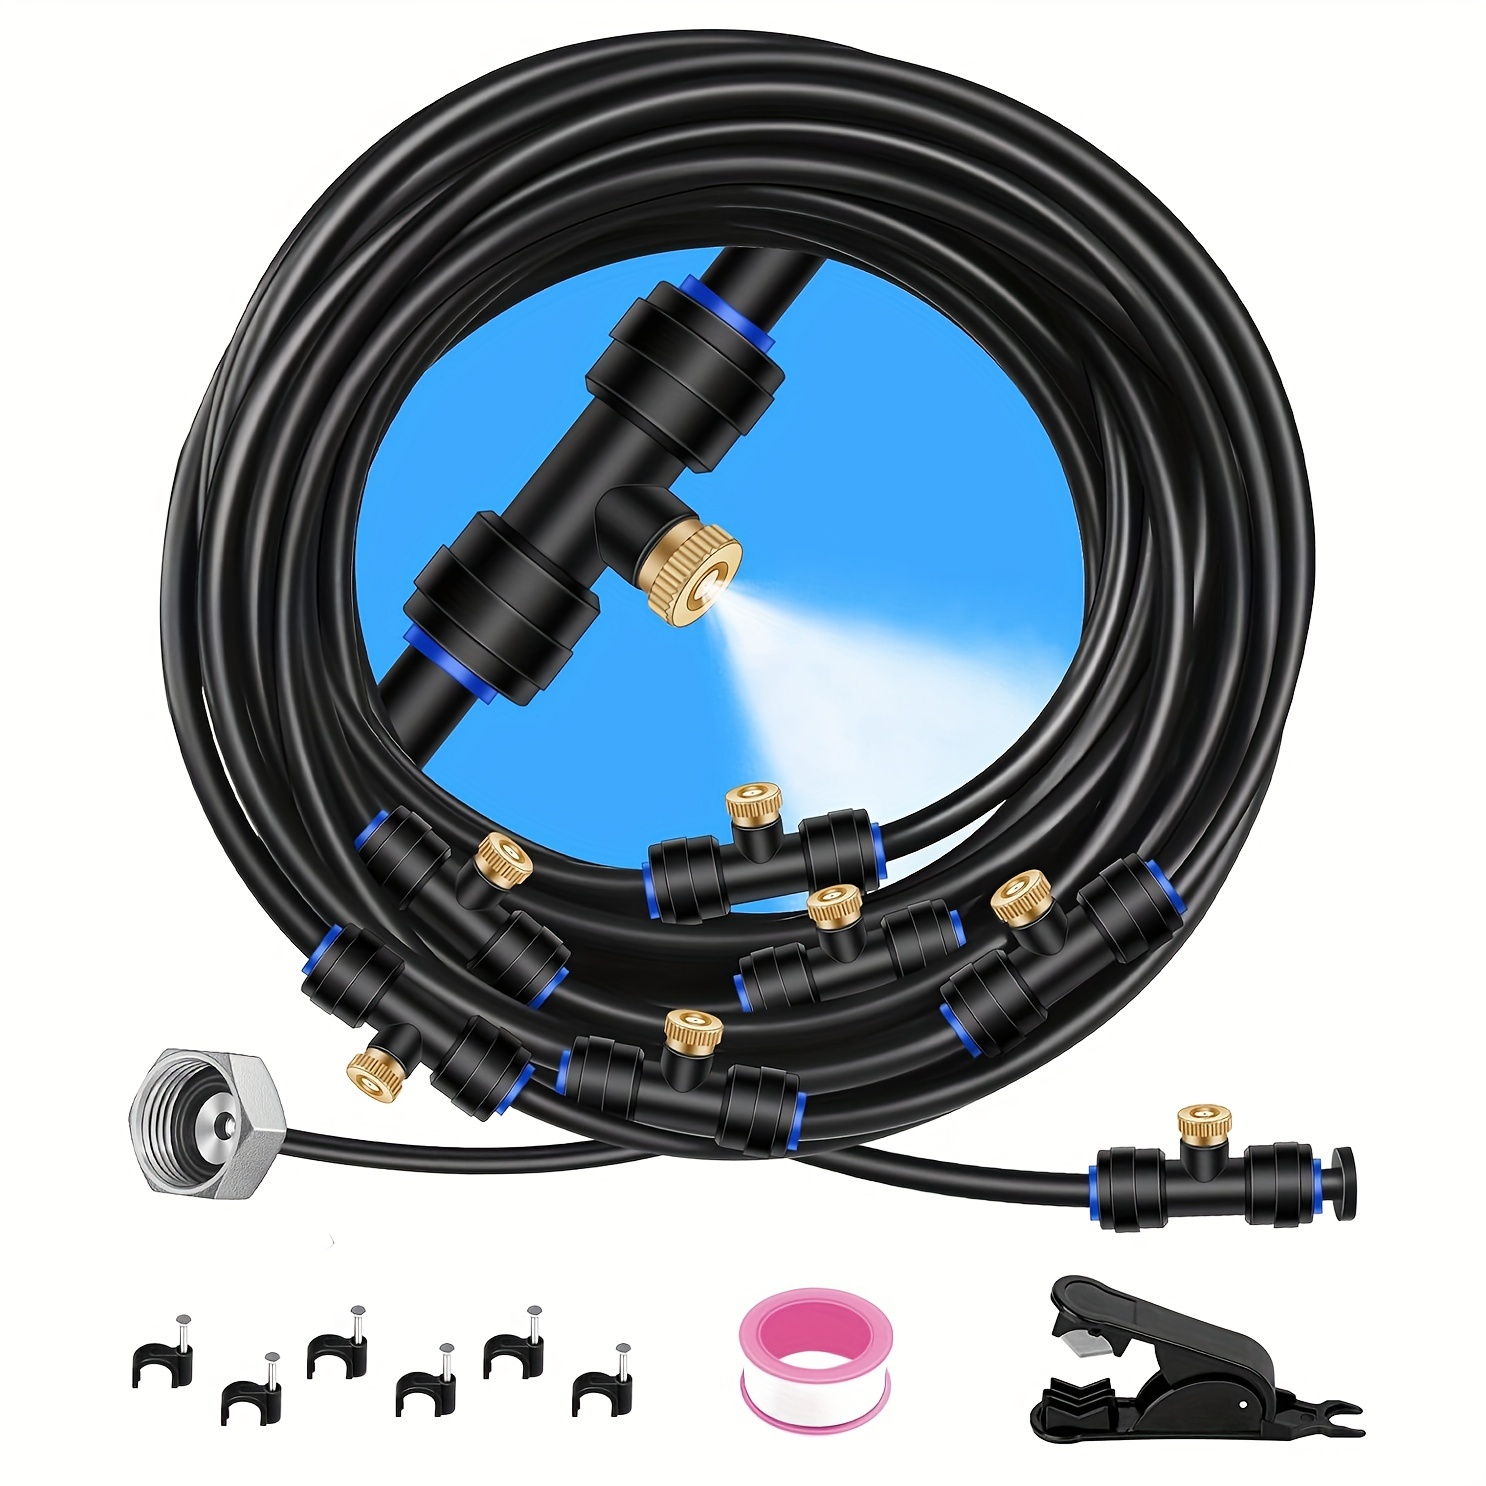 

Cooling System With Cooling Atomization, 19.68ft (6m) Atomization Line + 6 Brass Atomization Nozzles + Brass Adapter (3/4") Patio Garden Greenhouse Water Park Trampoline Outdoor Sprayer